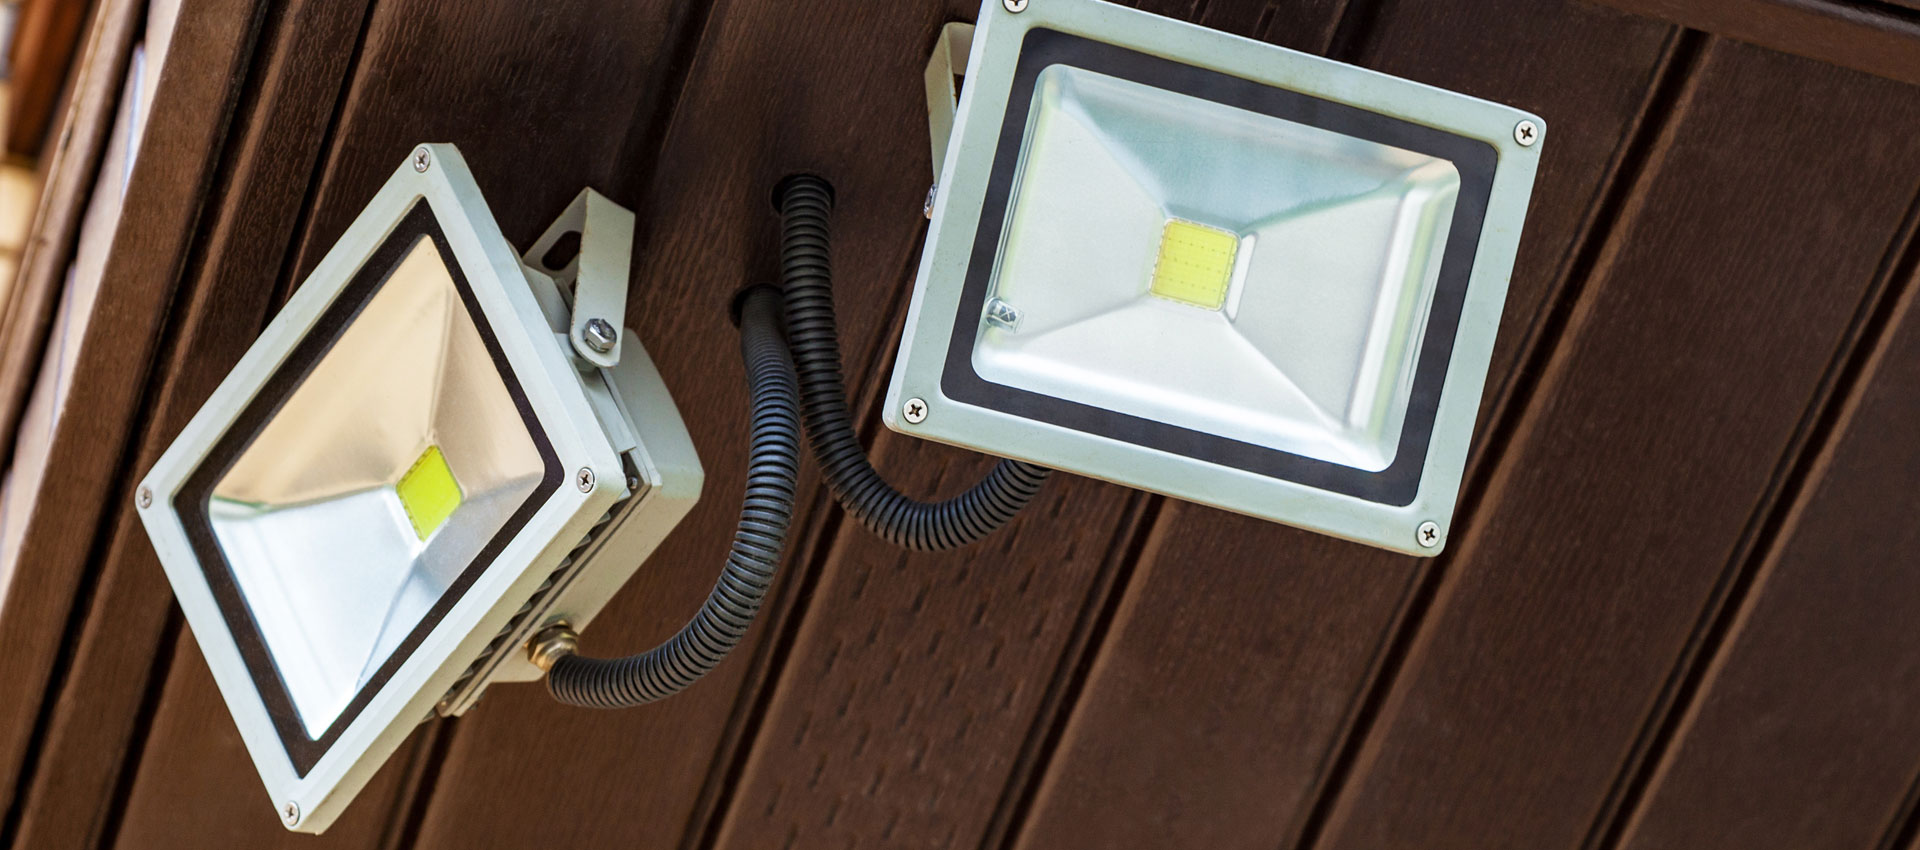 Outdoor Led Floodlights Tellco Europe